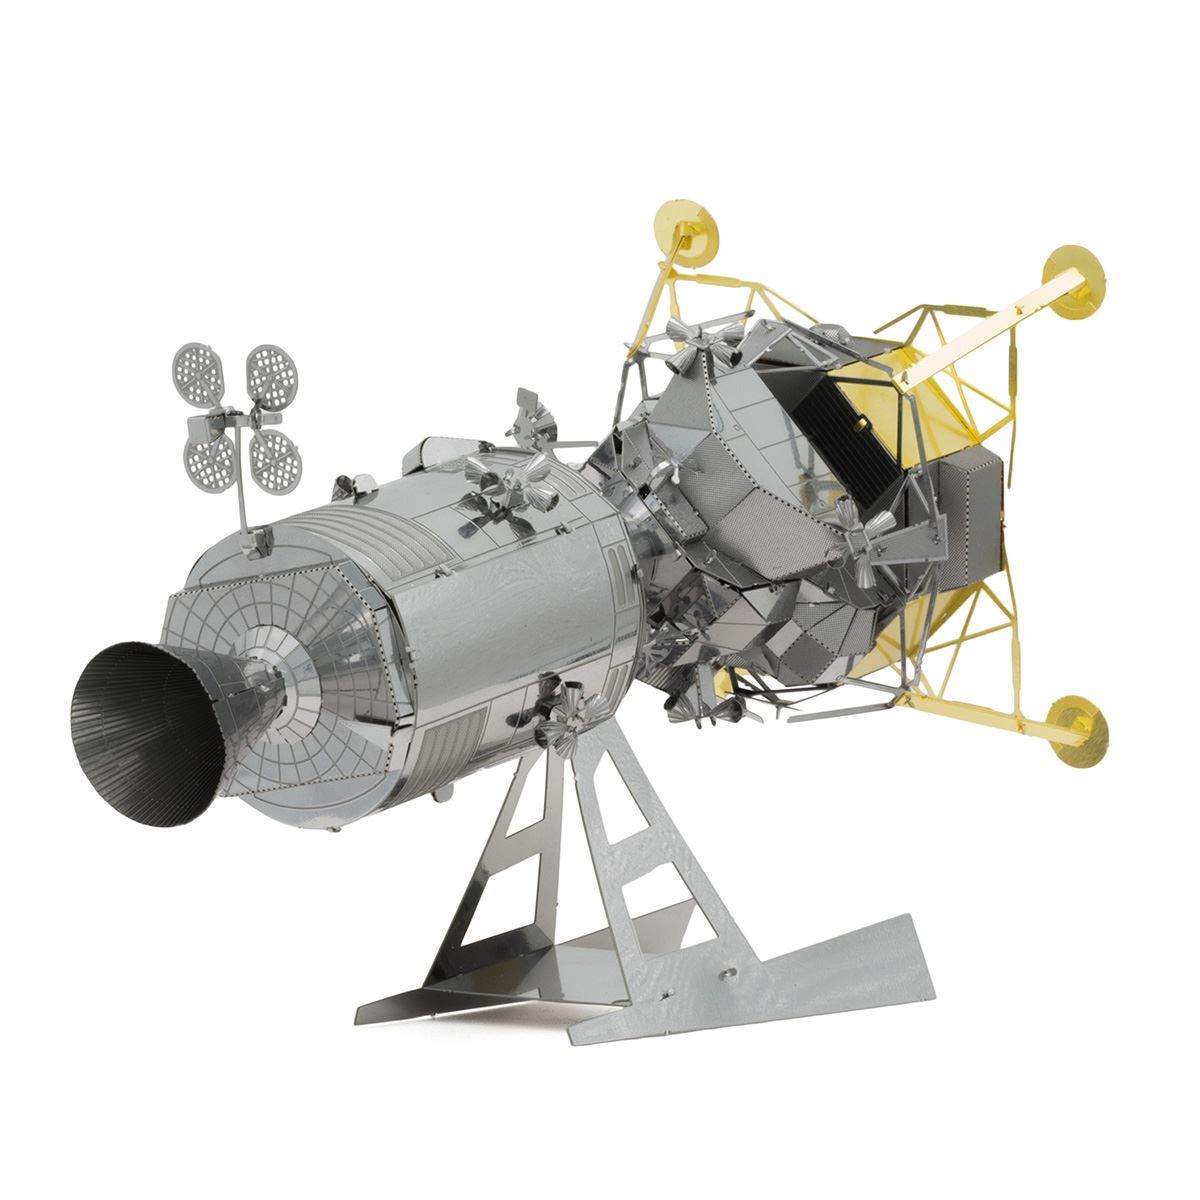 Fascinations Metal Earth Apollo 11 CSM With LM NASA 3d Puzzle Model Kits MMS168 for sale online 